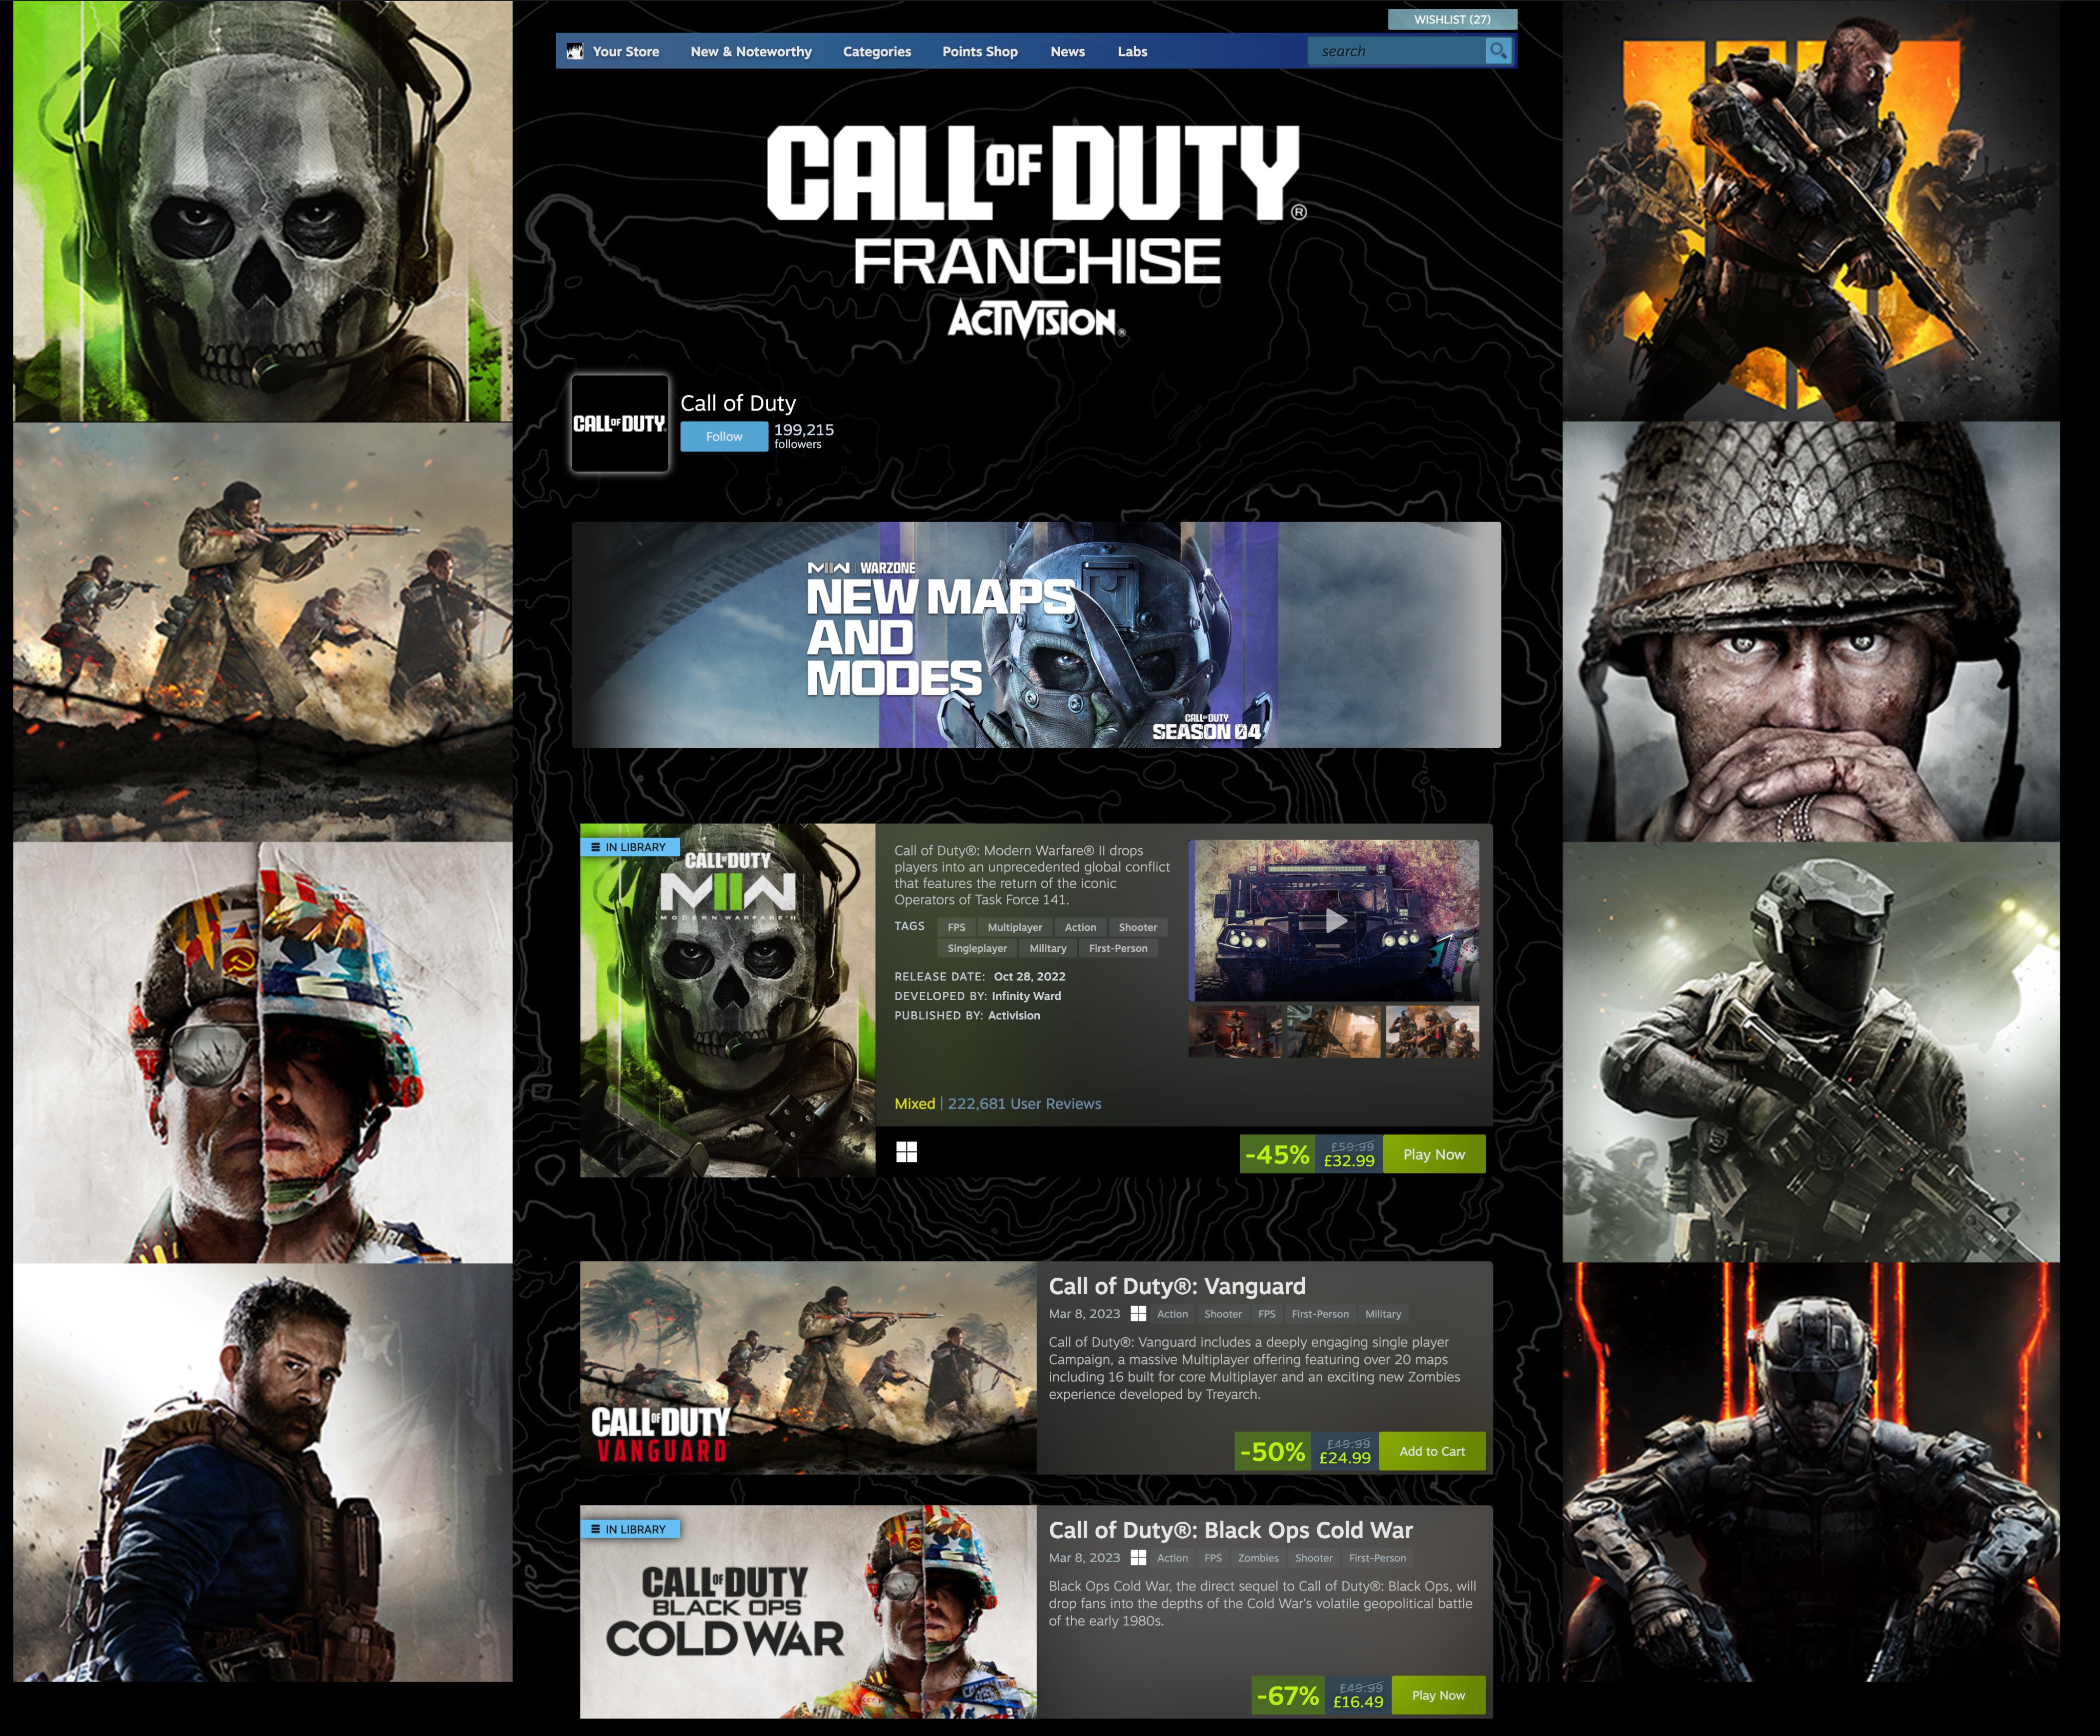 Either Call of Duty: Modern Warfare 2 is coming to Steam, or